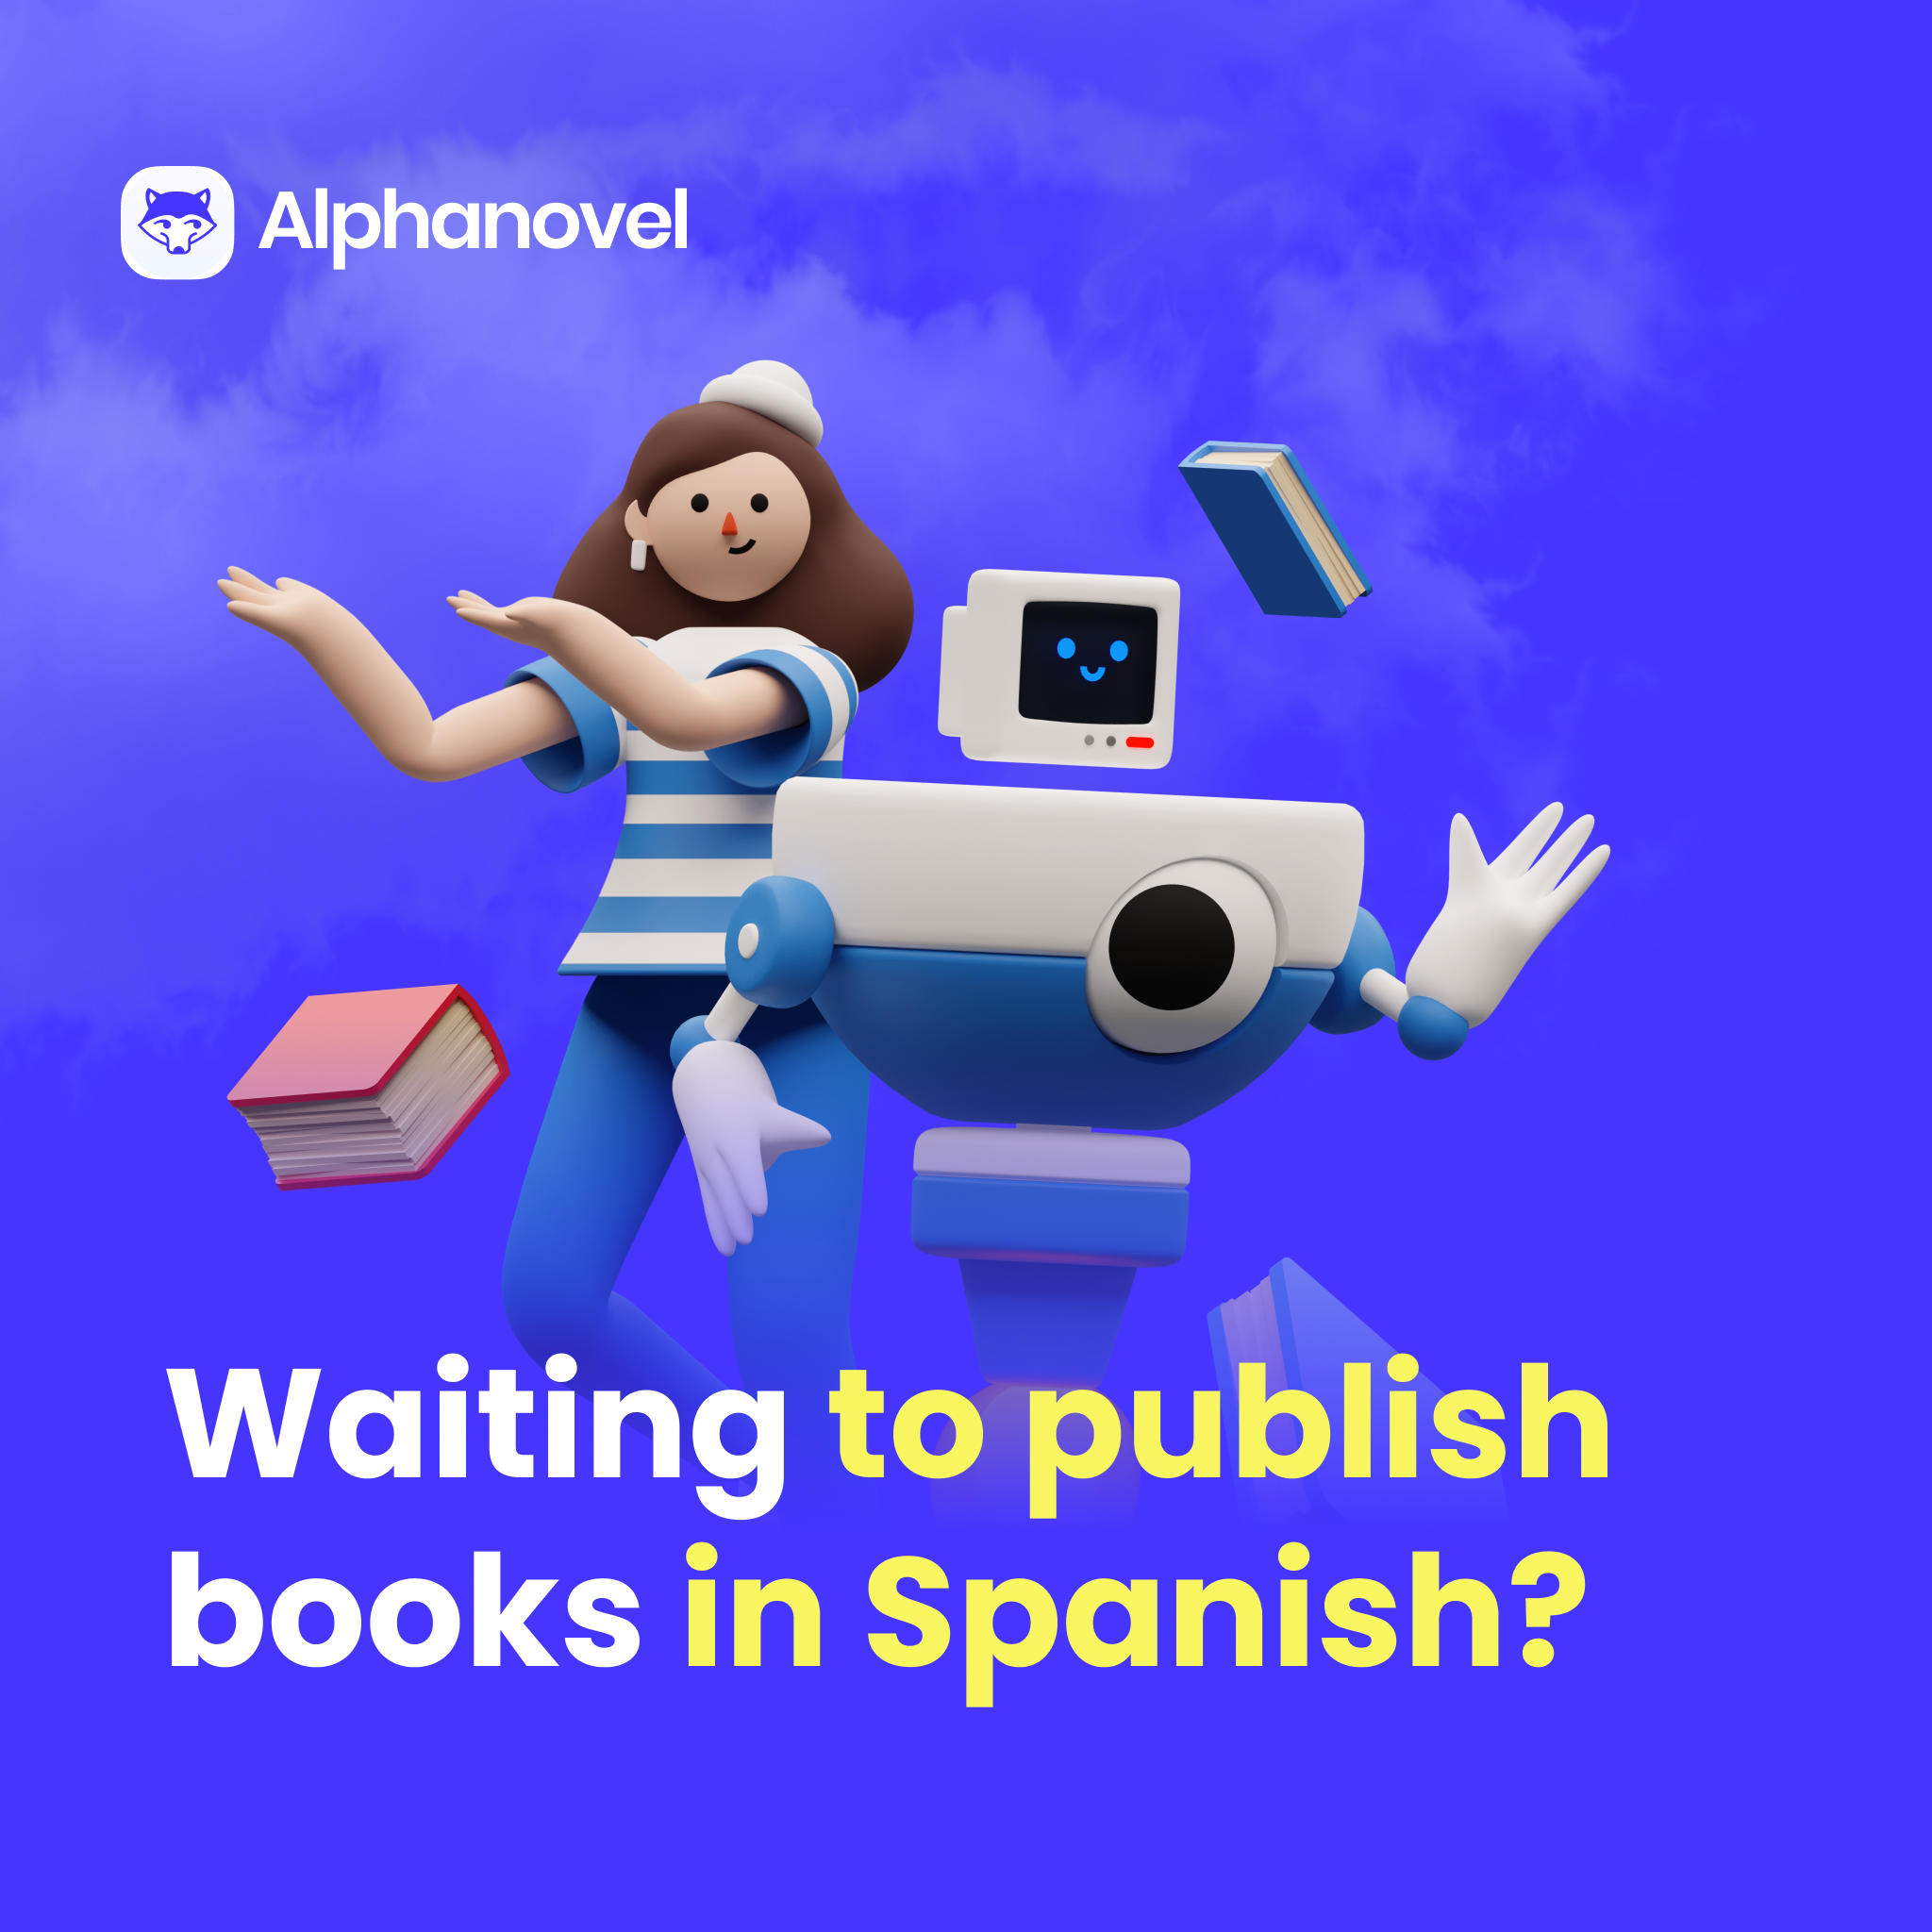 AlphaNovel is looking for Spanish books!